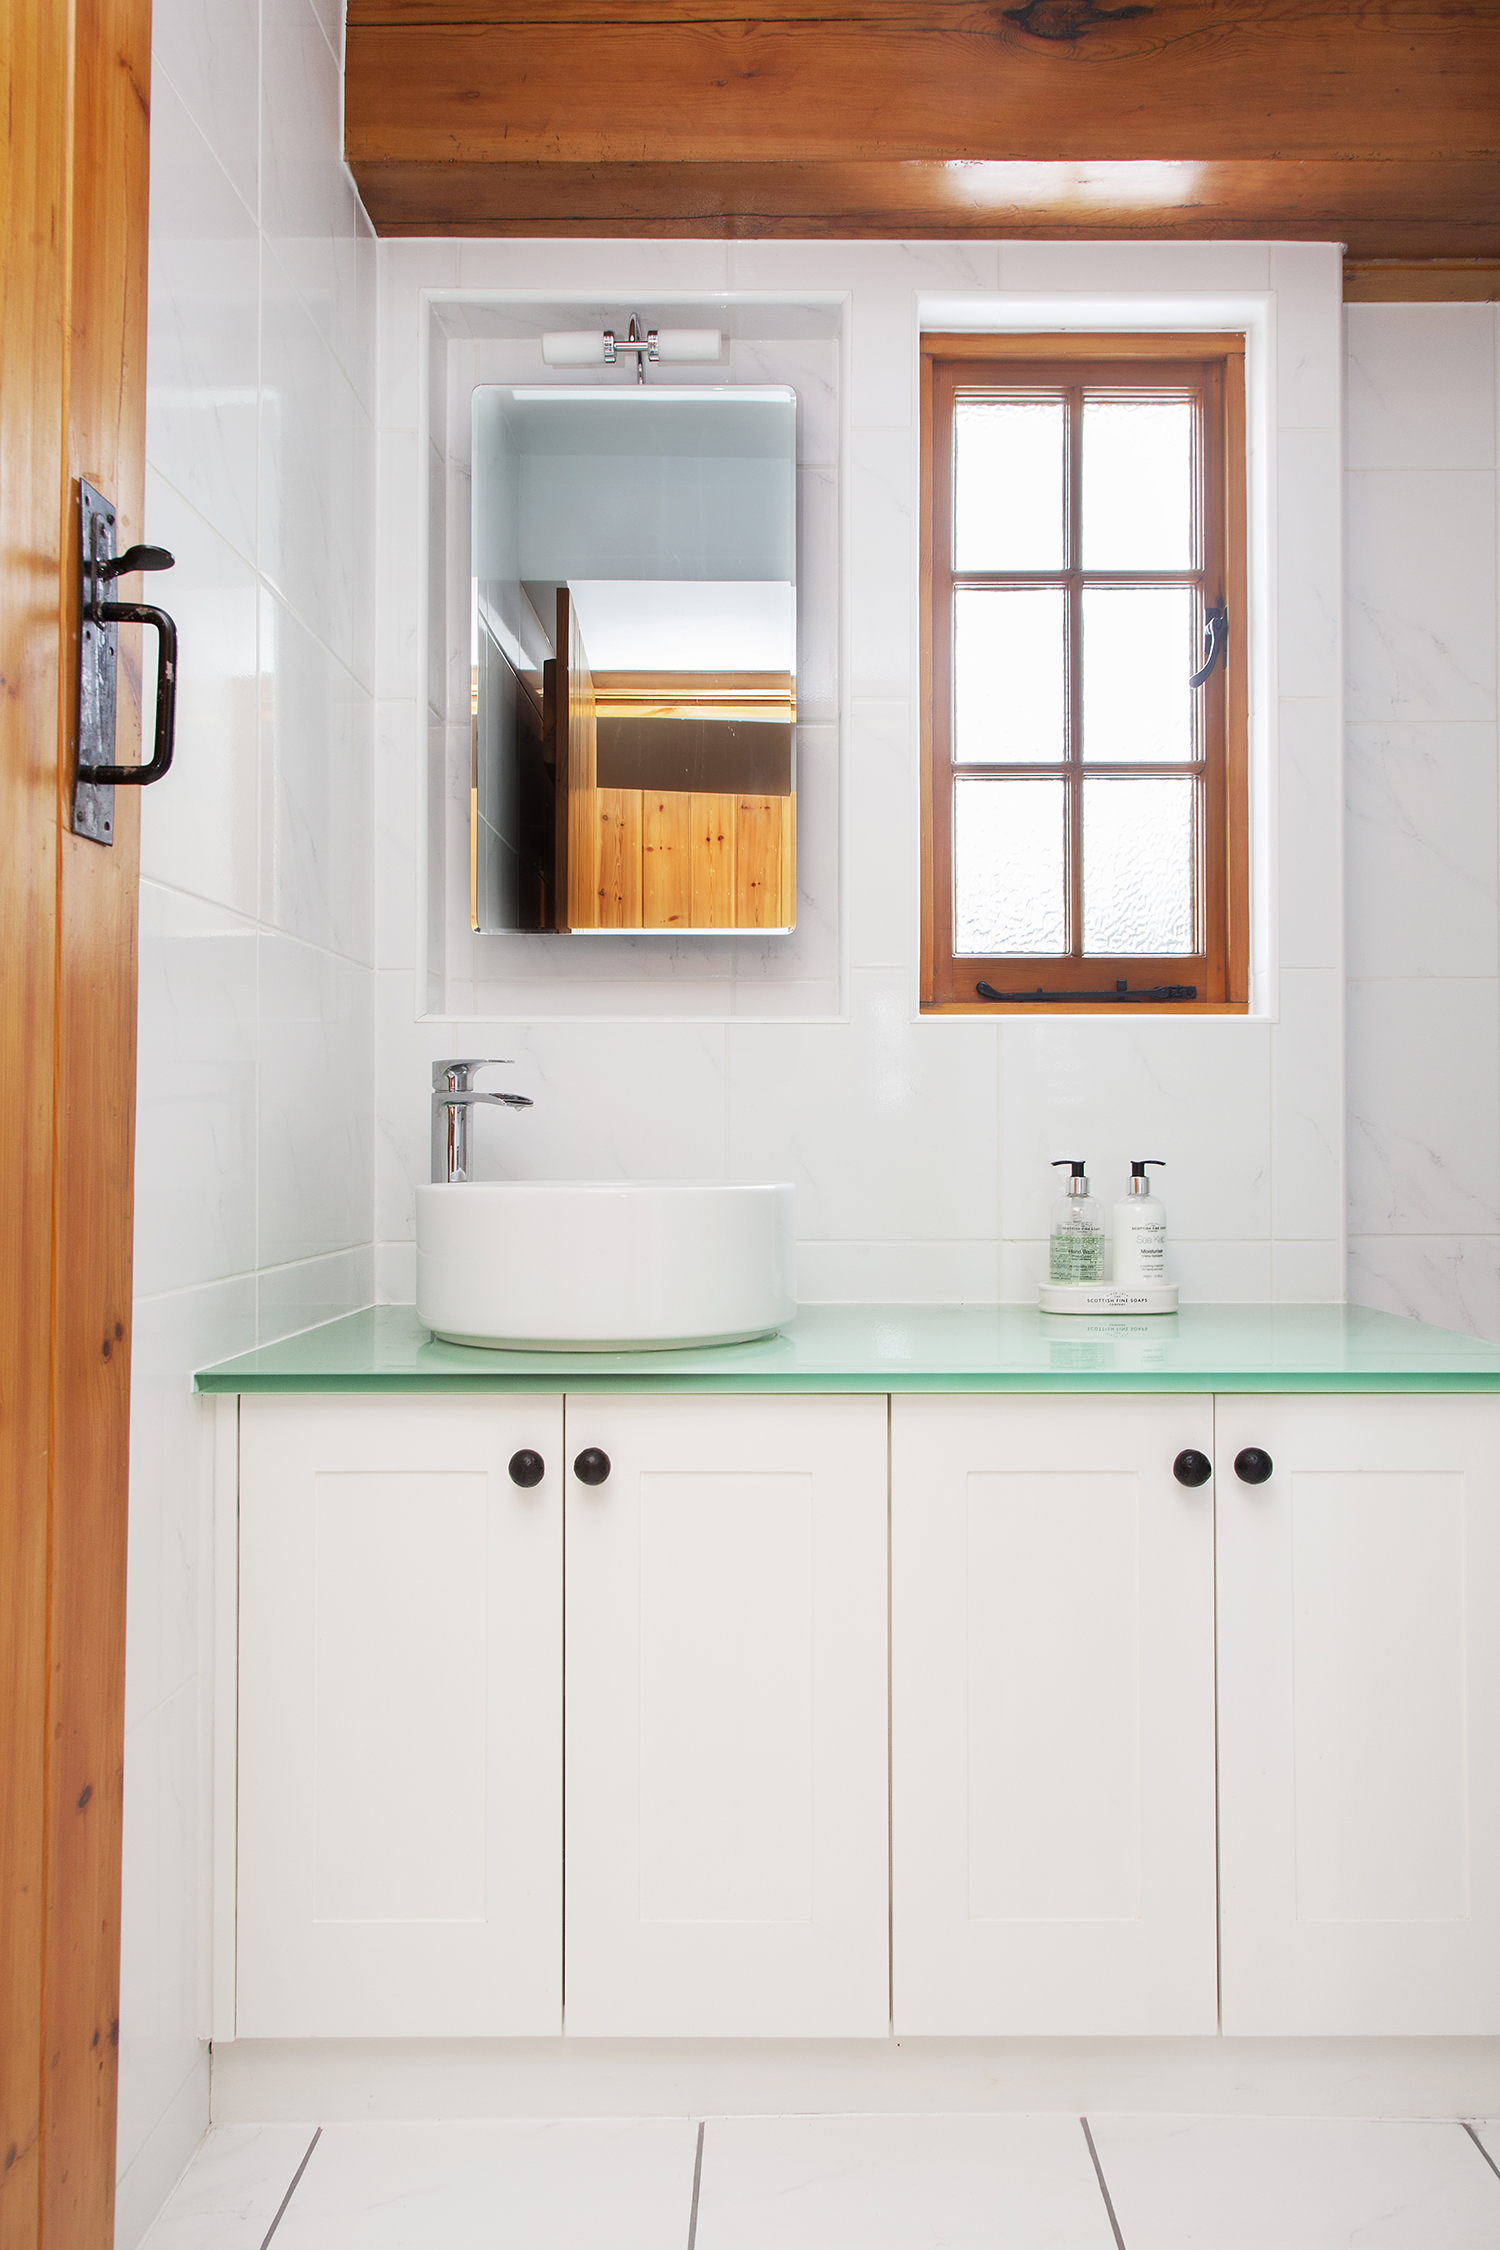 The bijoux bathroom was kept light and white with a splash of colour from the glass surface of the vanity top.